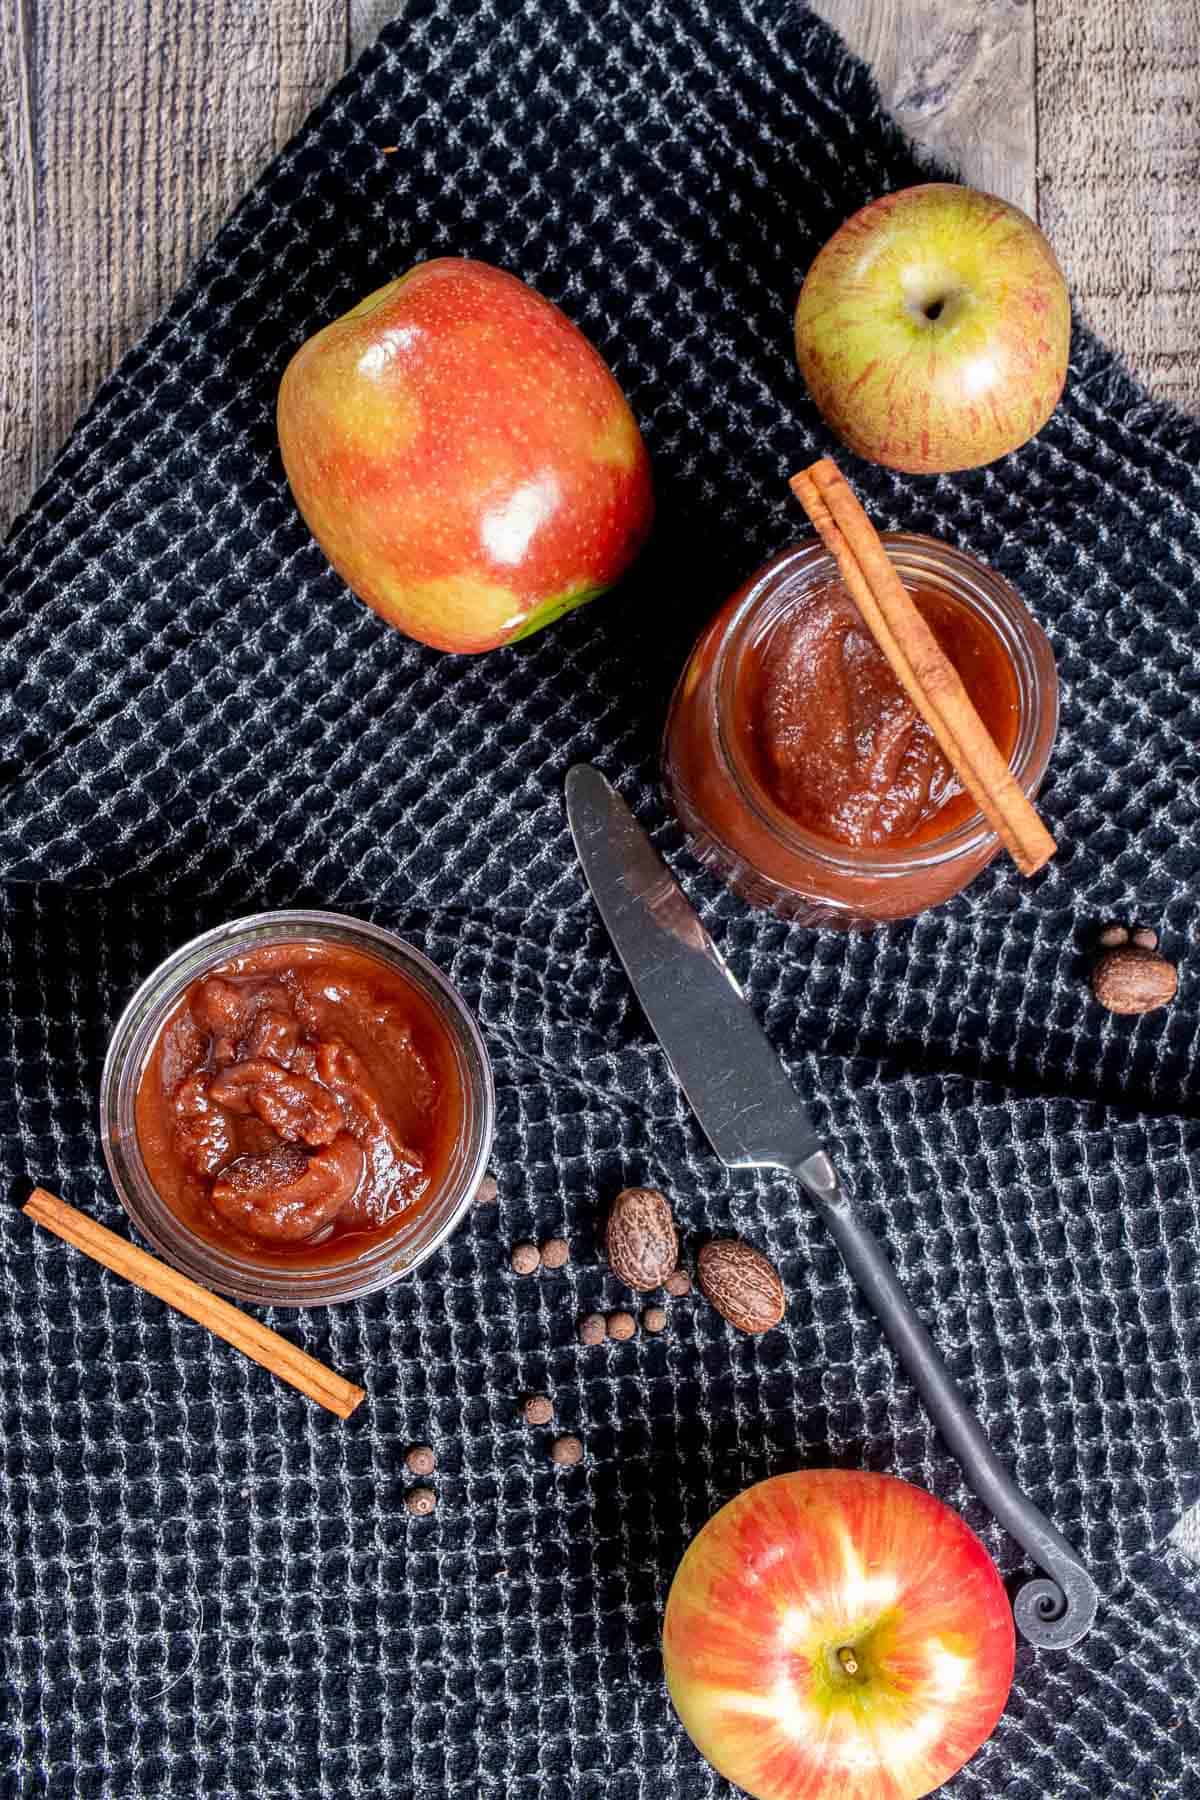 Overhead view of jars of apple butter on a black cloth surrounded by apples, cinnamon sticks, and whole nutmegs.